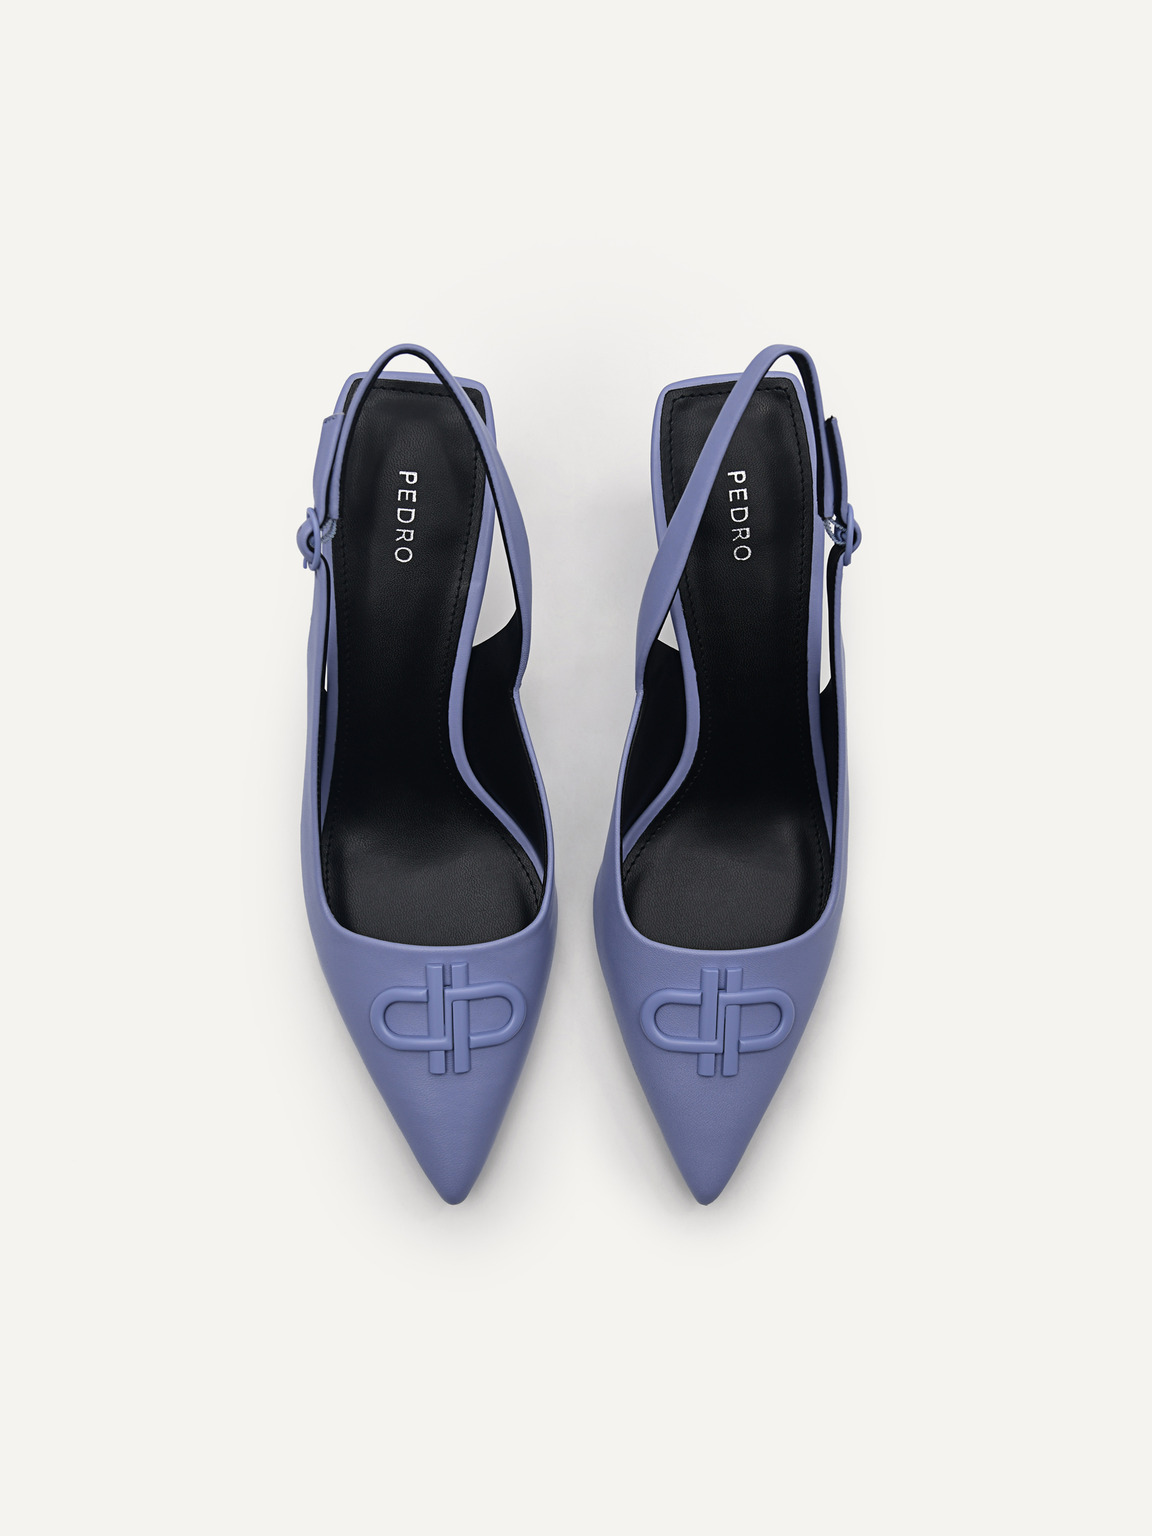 PEDRO Icon Leather Pointed Slingback Pumps, Violet